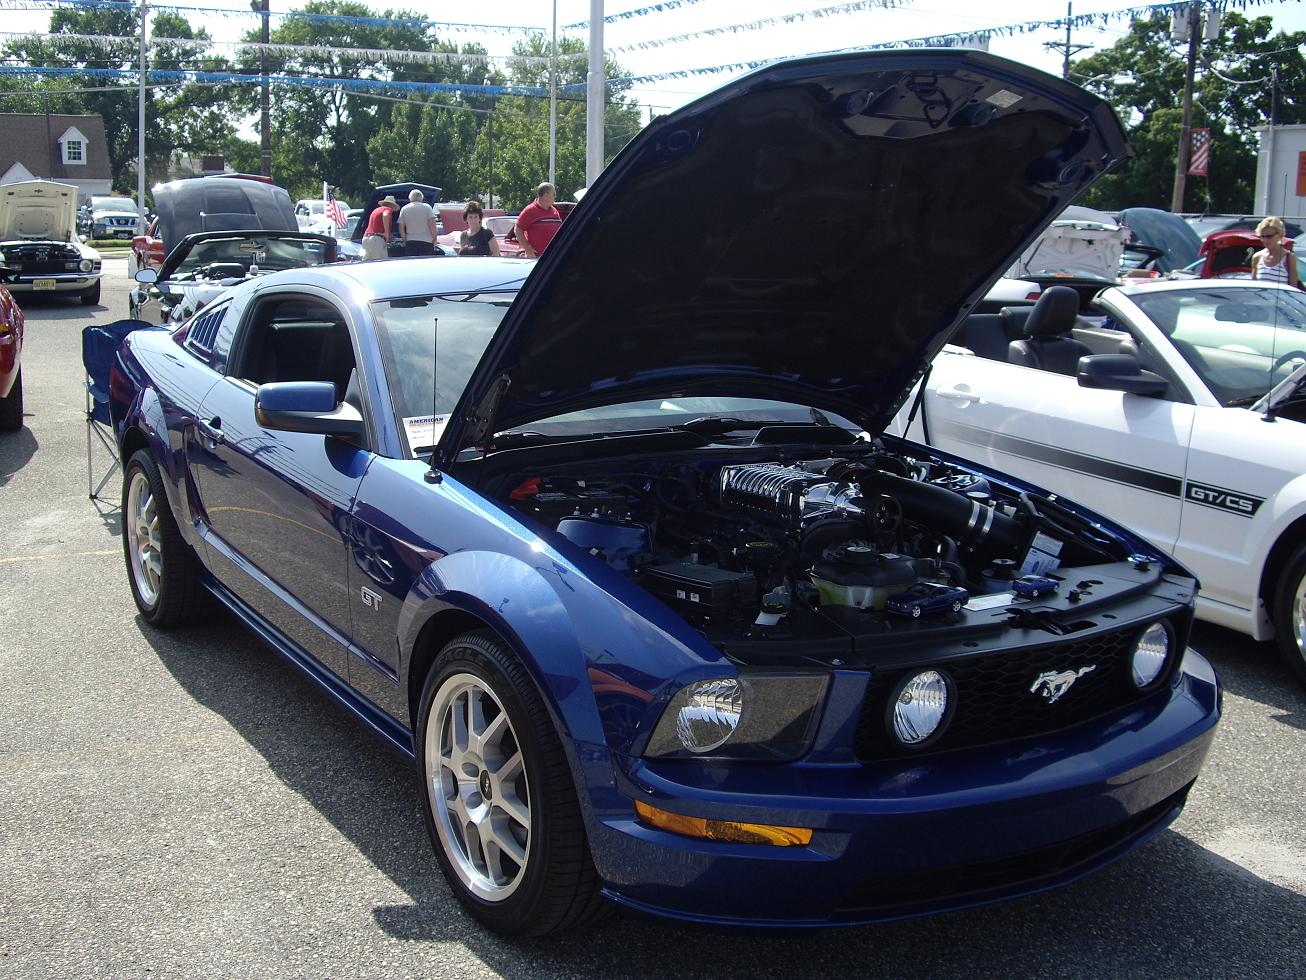  2008 Ford Mustang GT